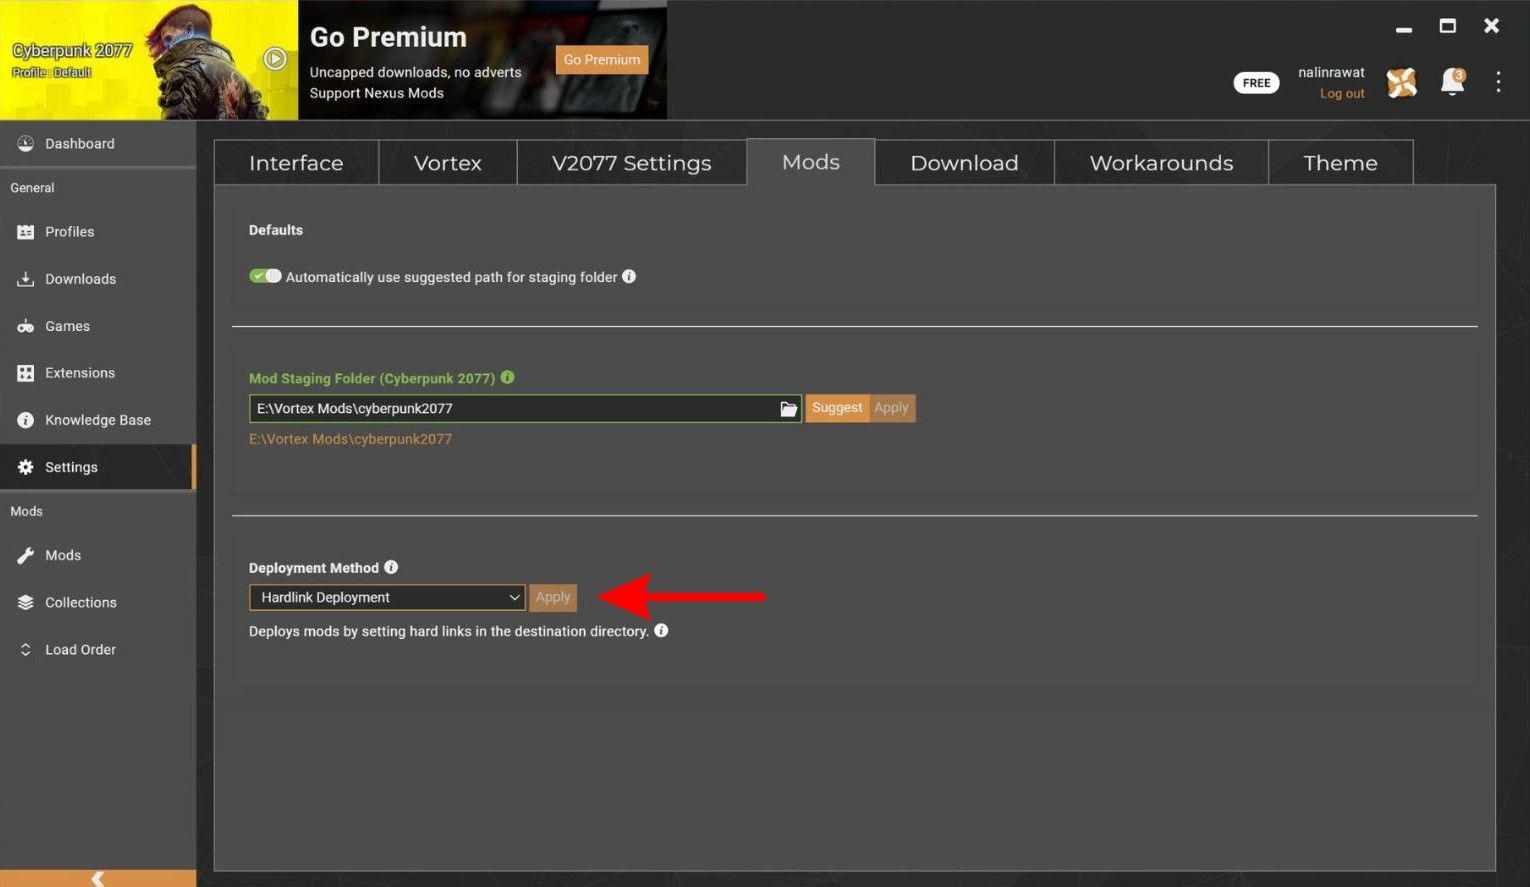 In Vortex Mod Manager, go to Settings then Mods and change the Deployment method to Hardlink